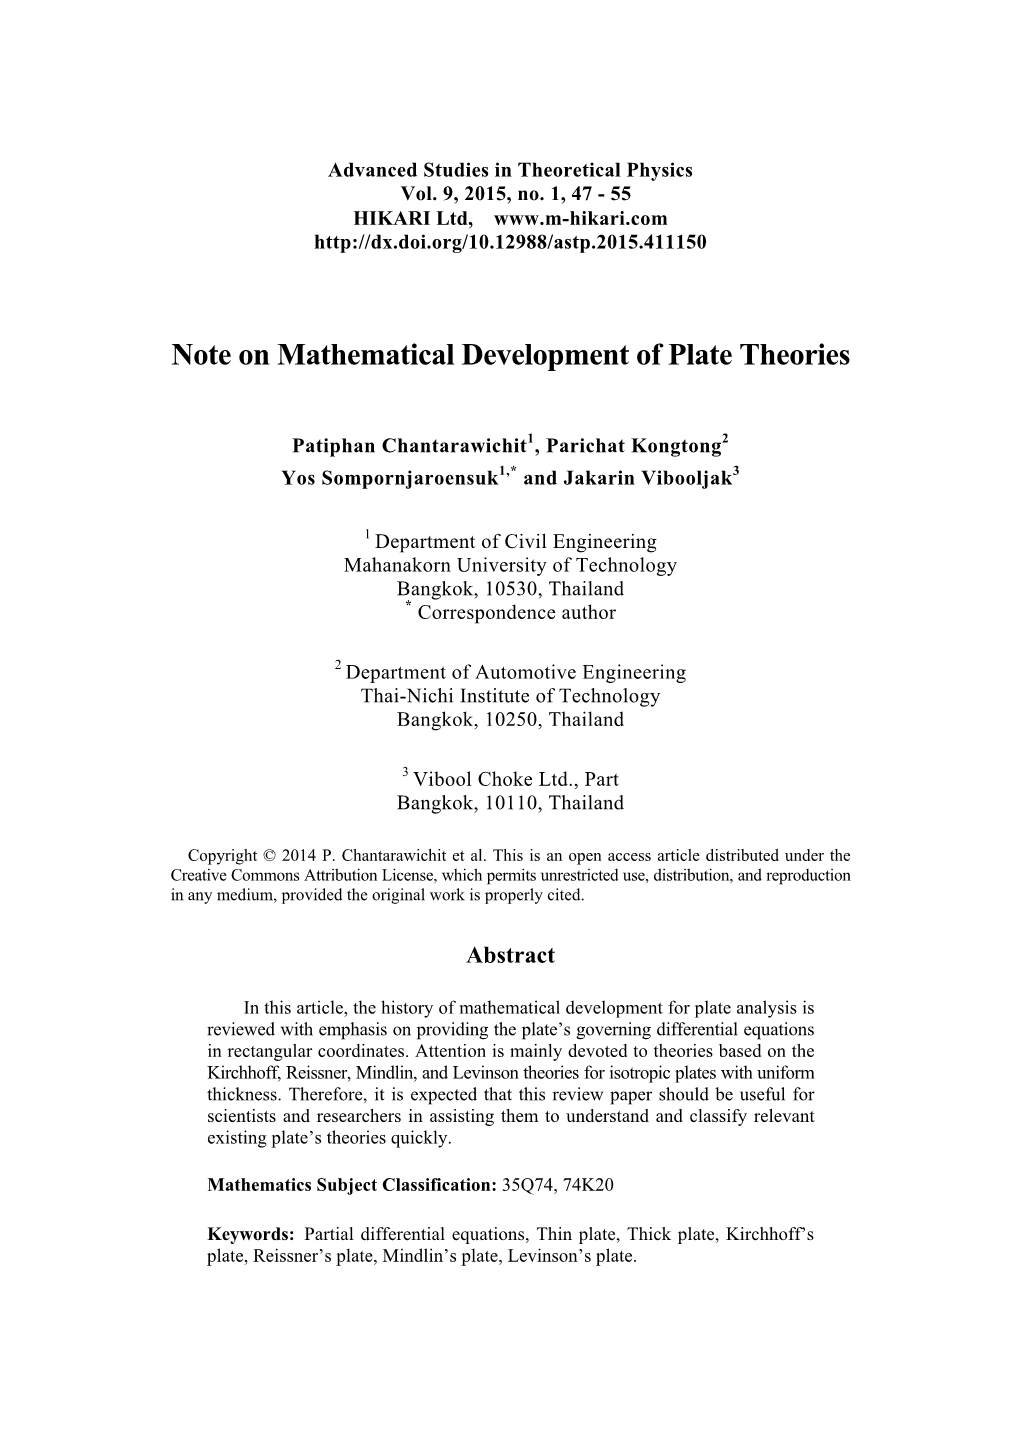 Note on Mathematical Development of Plate Theories